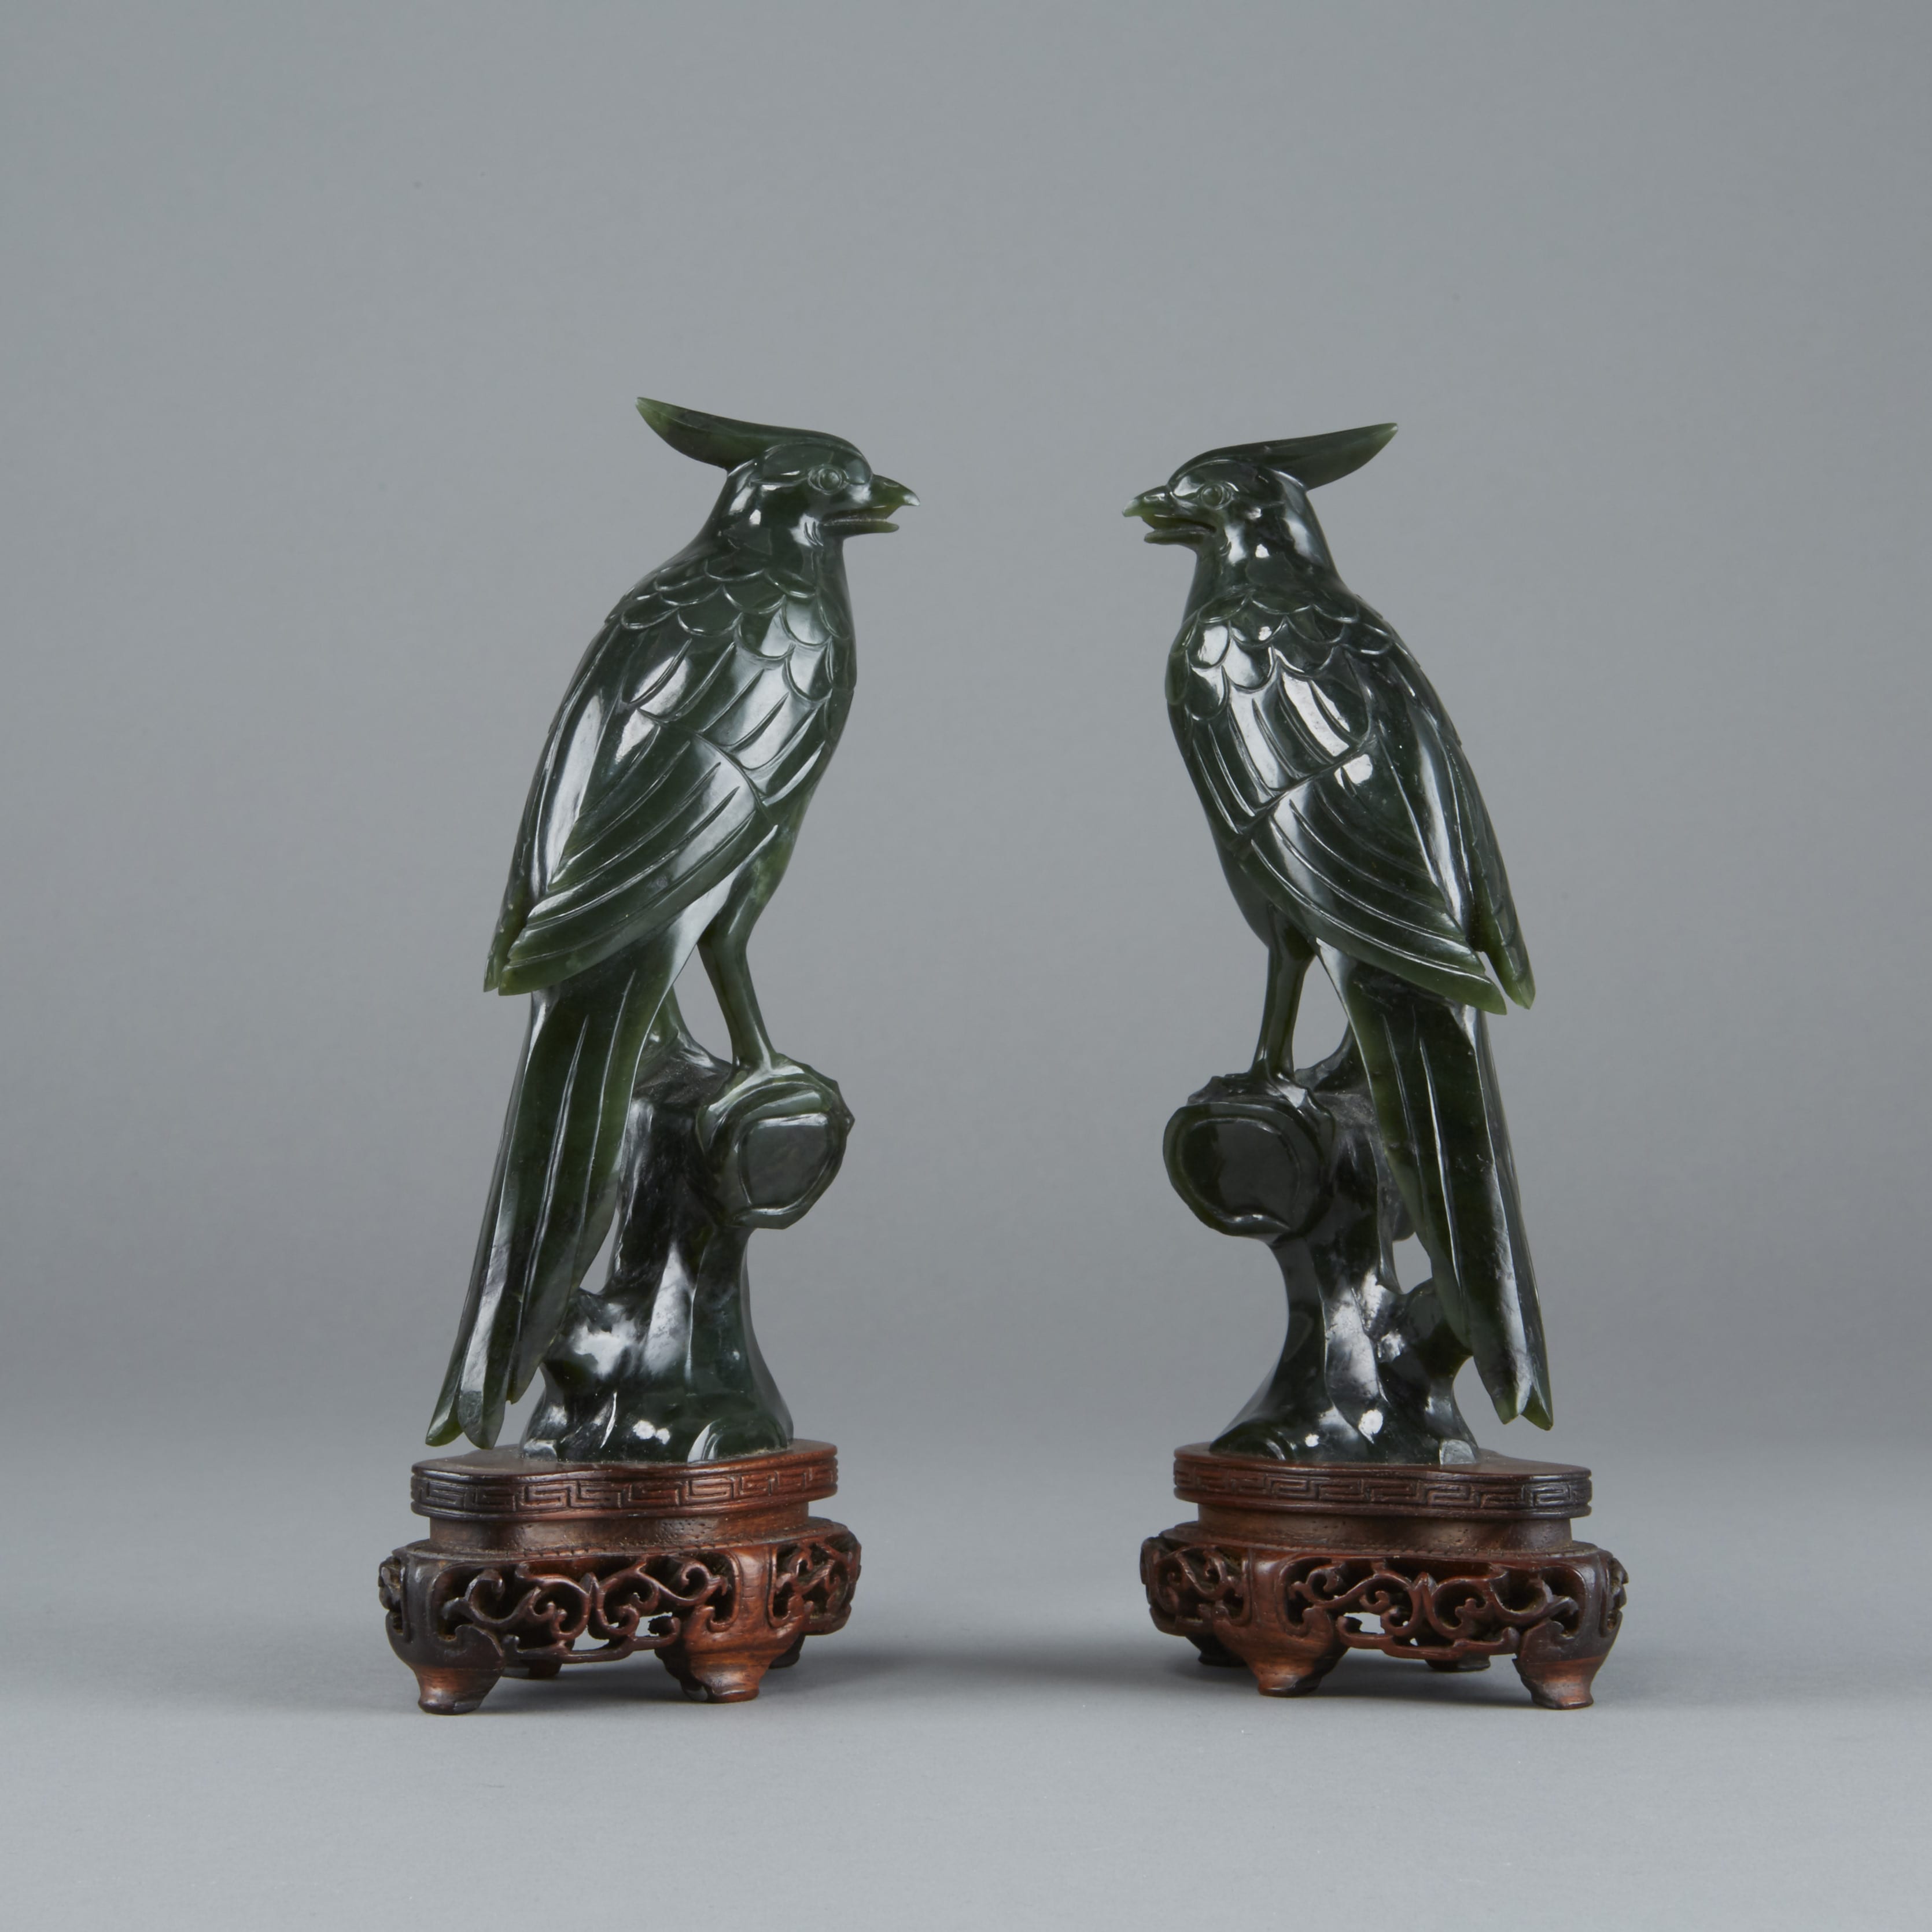 Lot 039: Pair of Chinese Late Qing or Republic period dark green Jade Birds on Original Stands